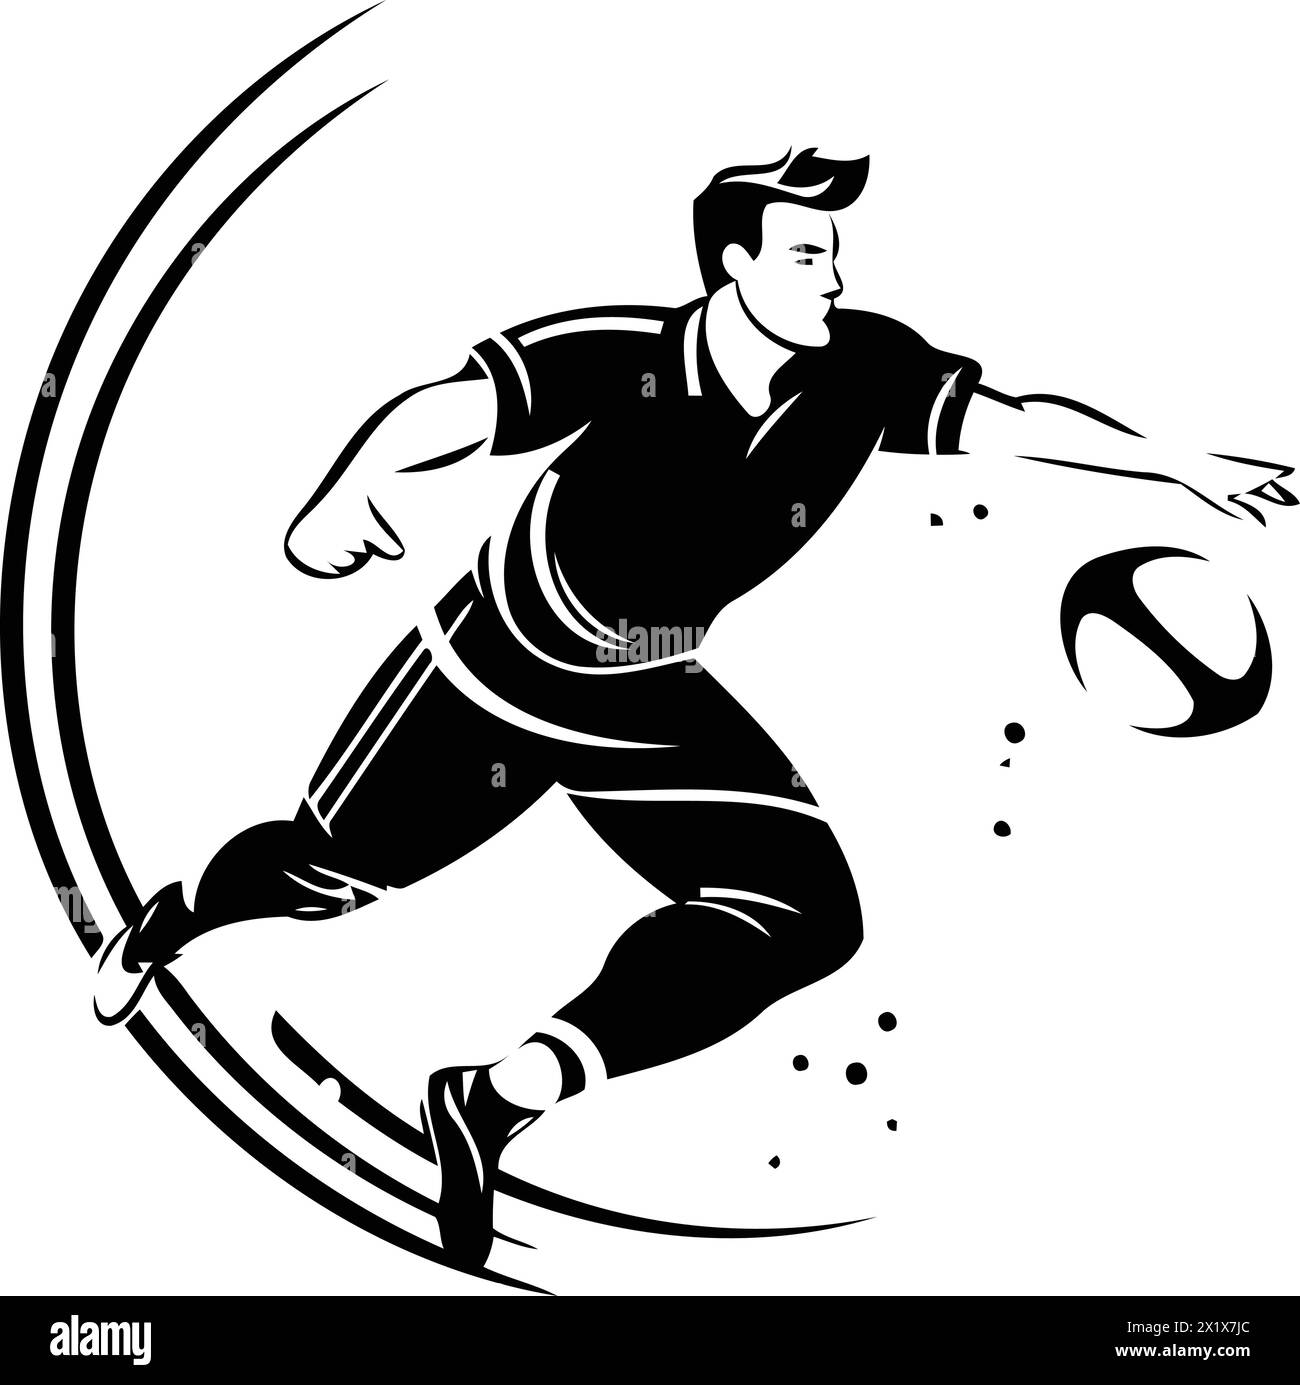 Soccer player vector logo template. Football or soccer player with ball Stock Vector